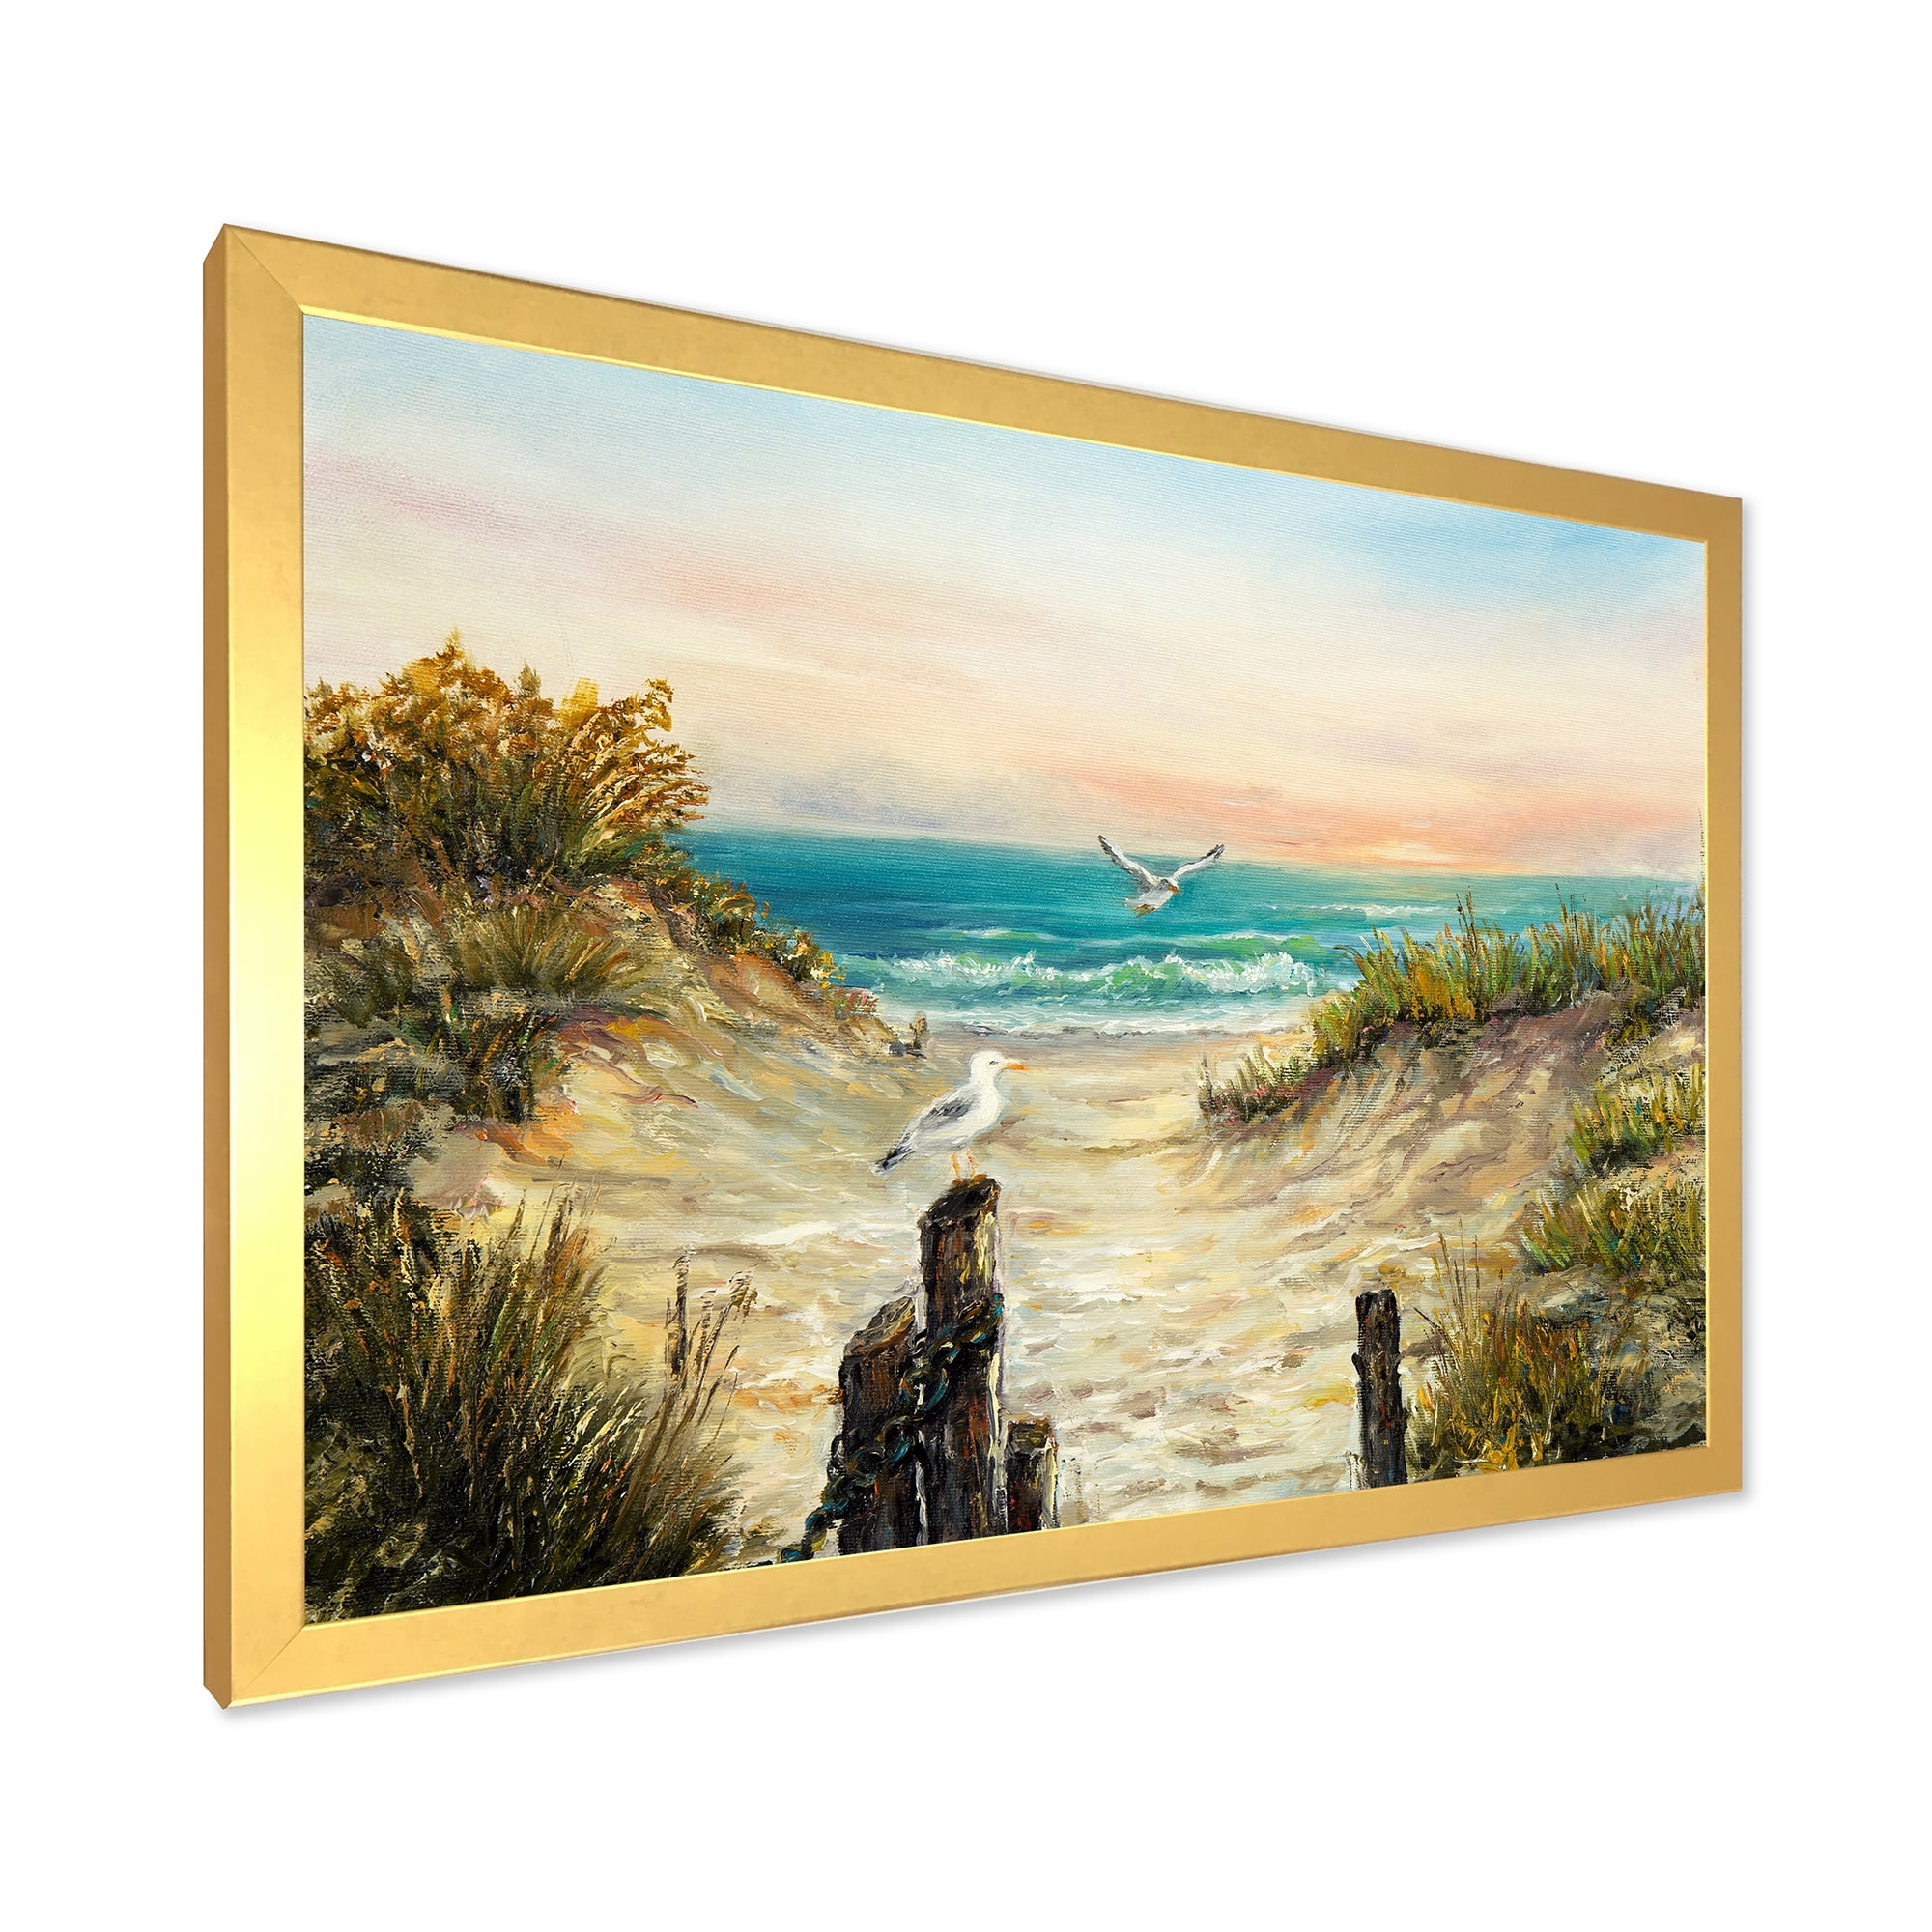 Pink Sunset Beach Ocean Photo on Canvas Print Framed Ready to Hang 